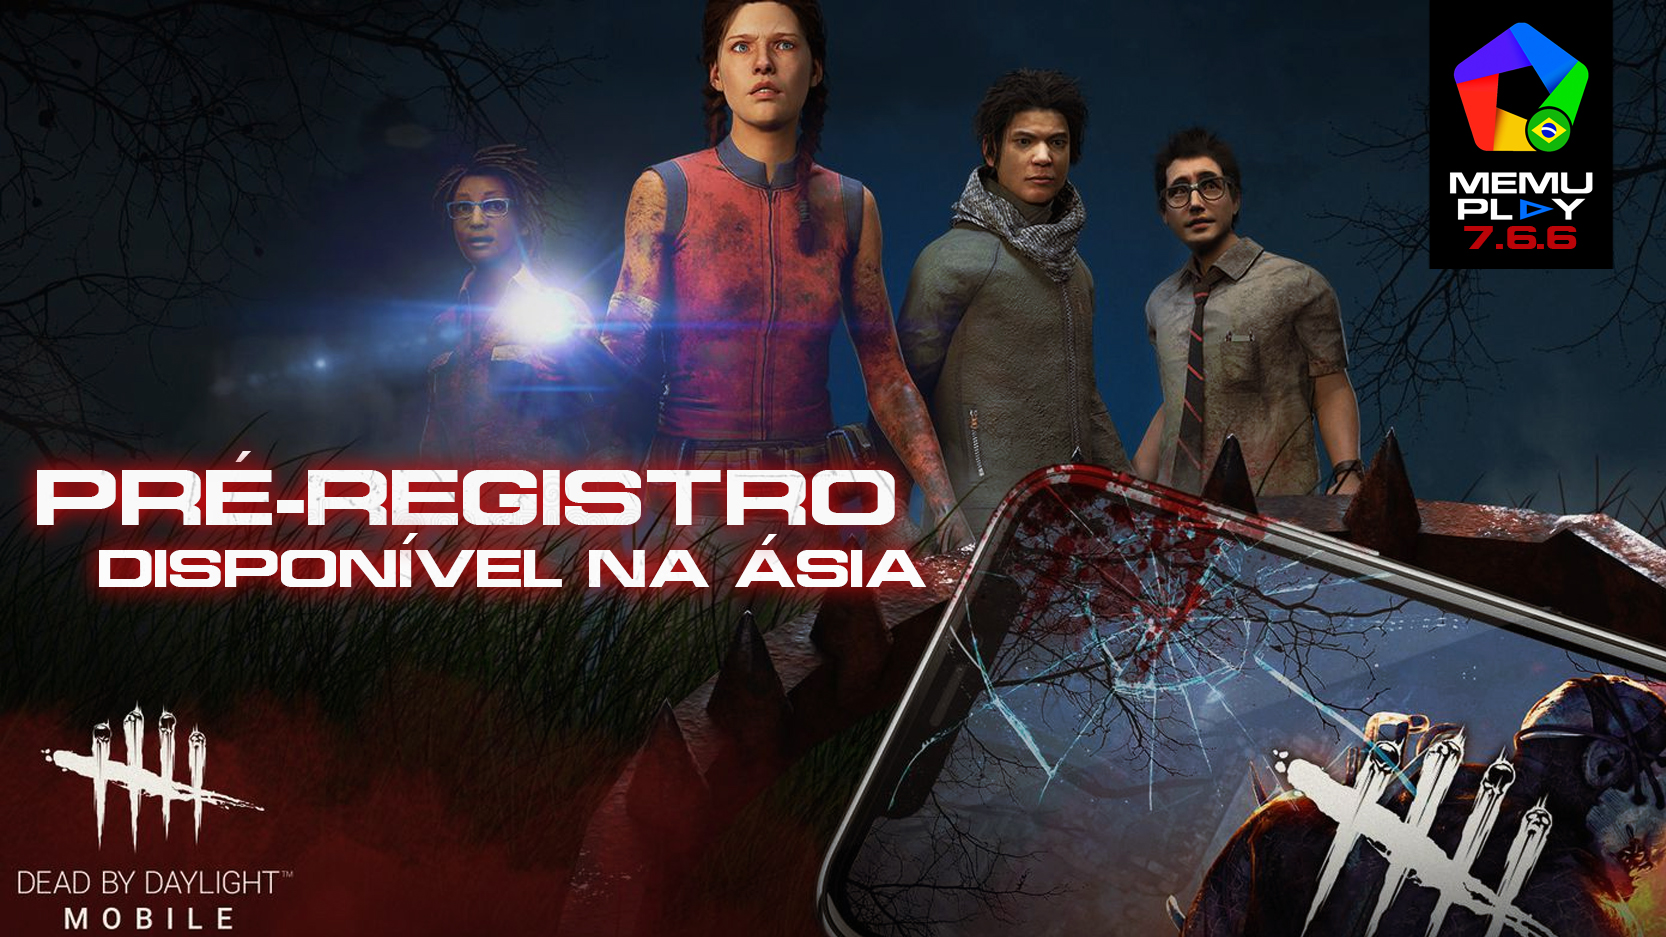 Dead by Daylight Mobile – Official Website for Southeast Asia